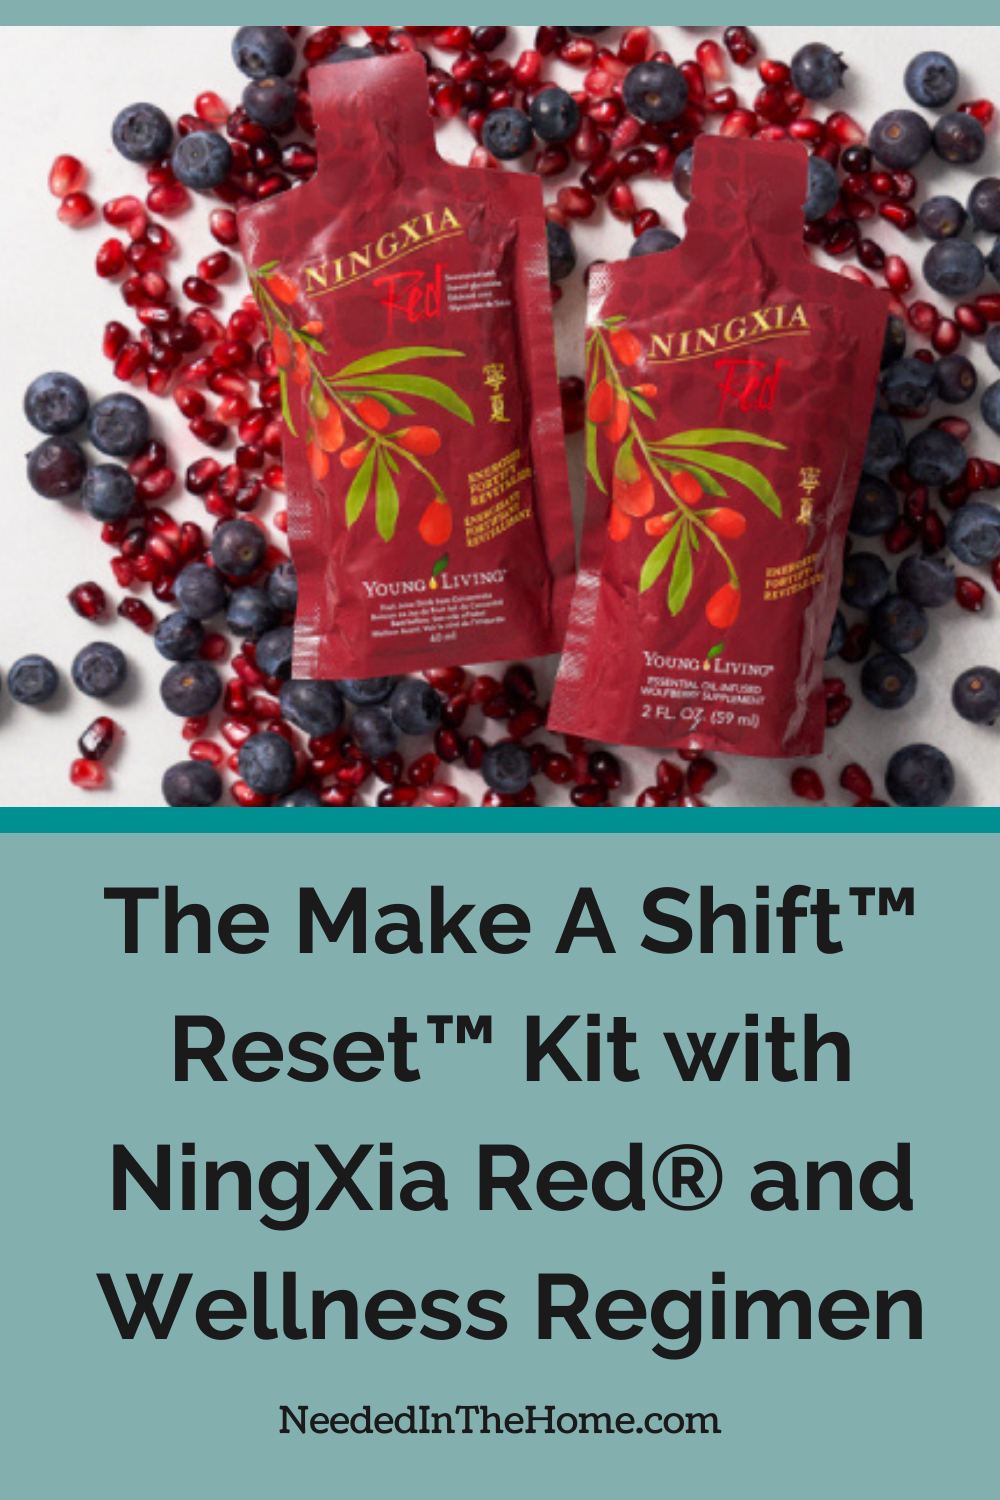 wolfberries blueberries pomegranites around two pouches of ningxia red the make a shift reset kit with ningxia red and wellness regimen neededinthehome